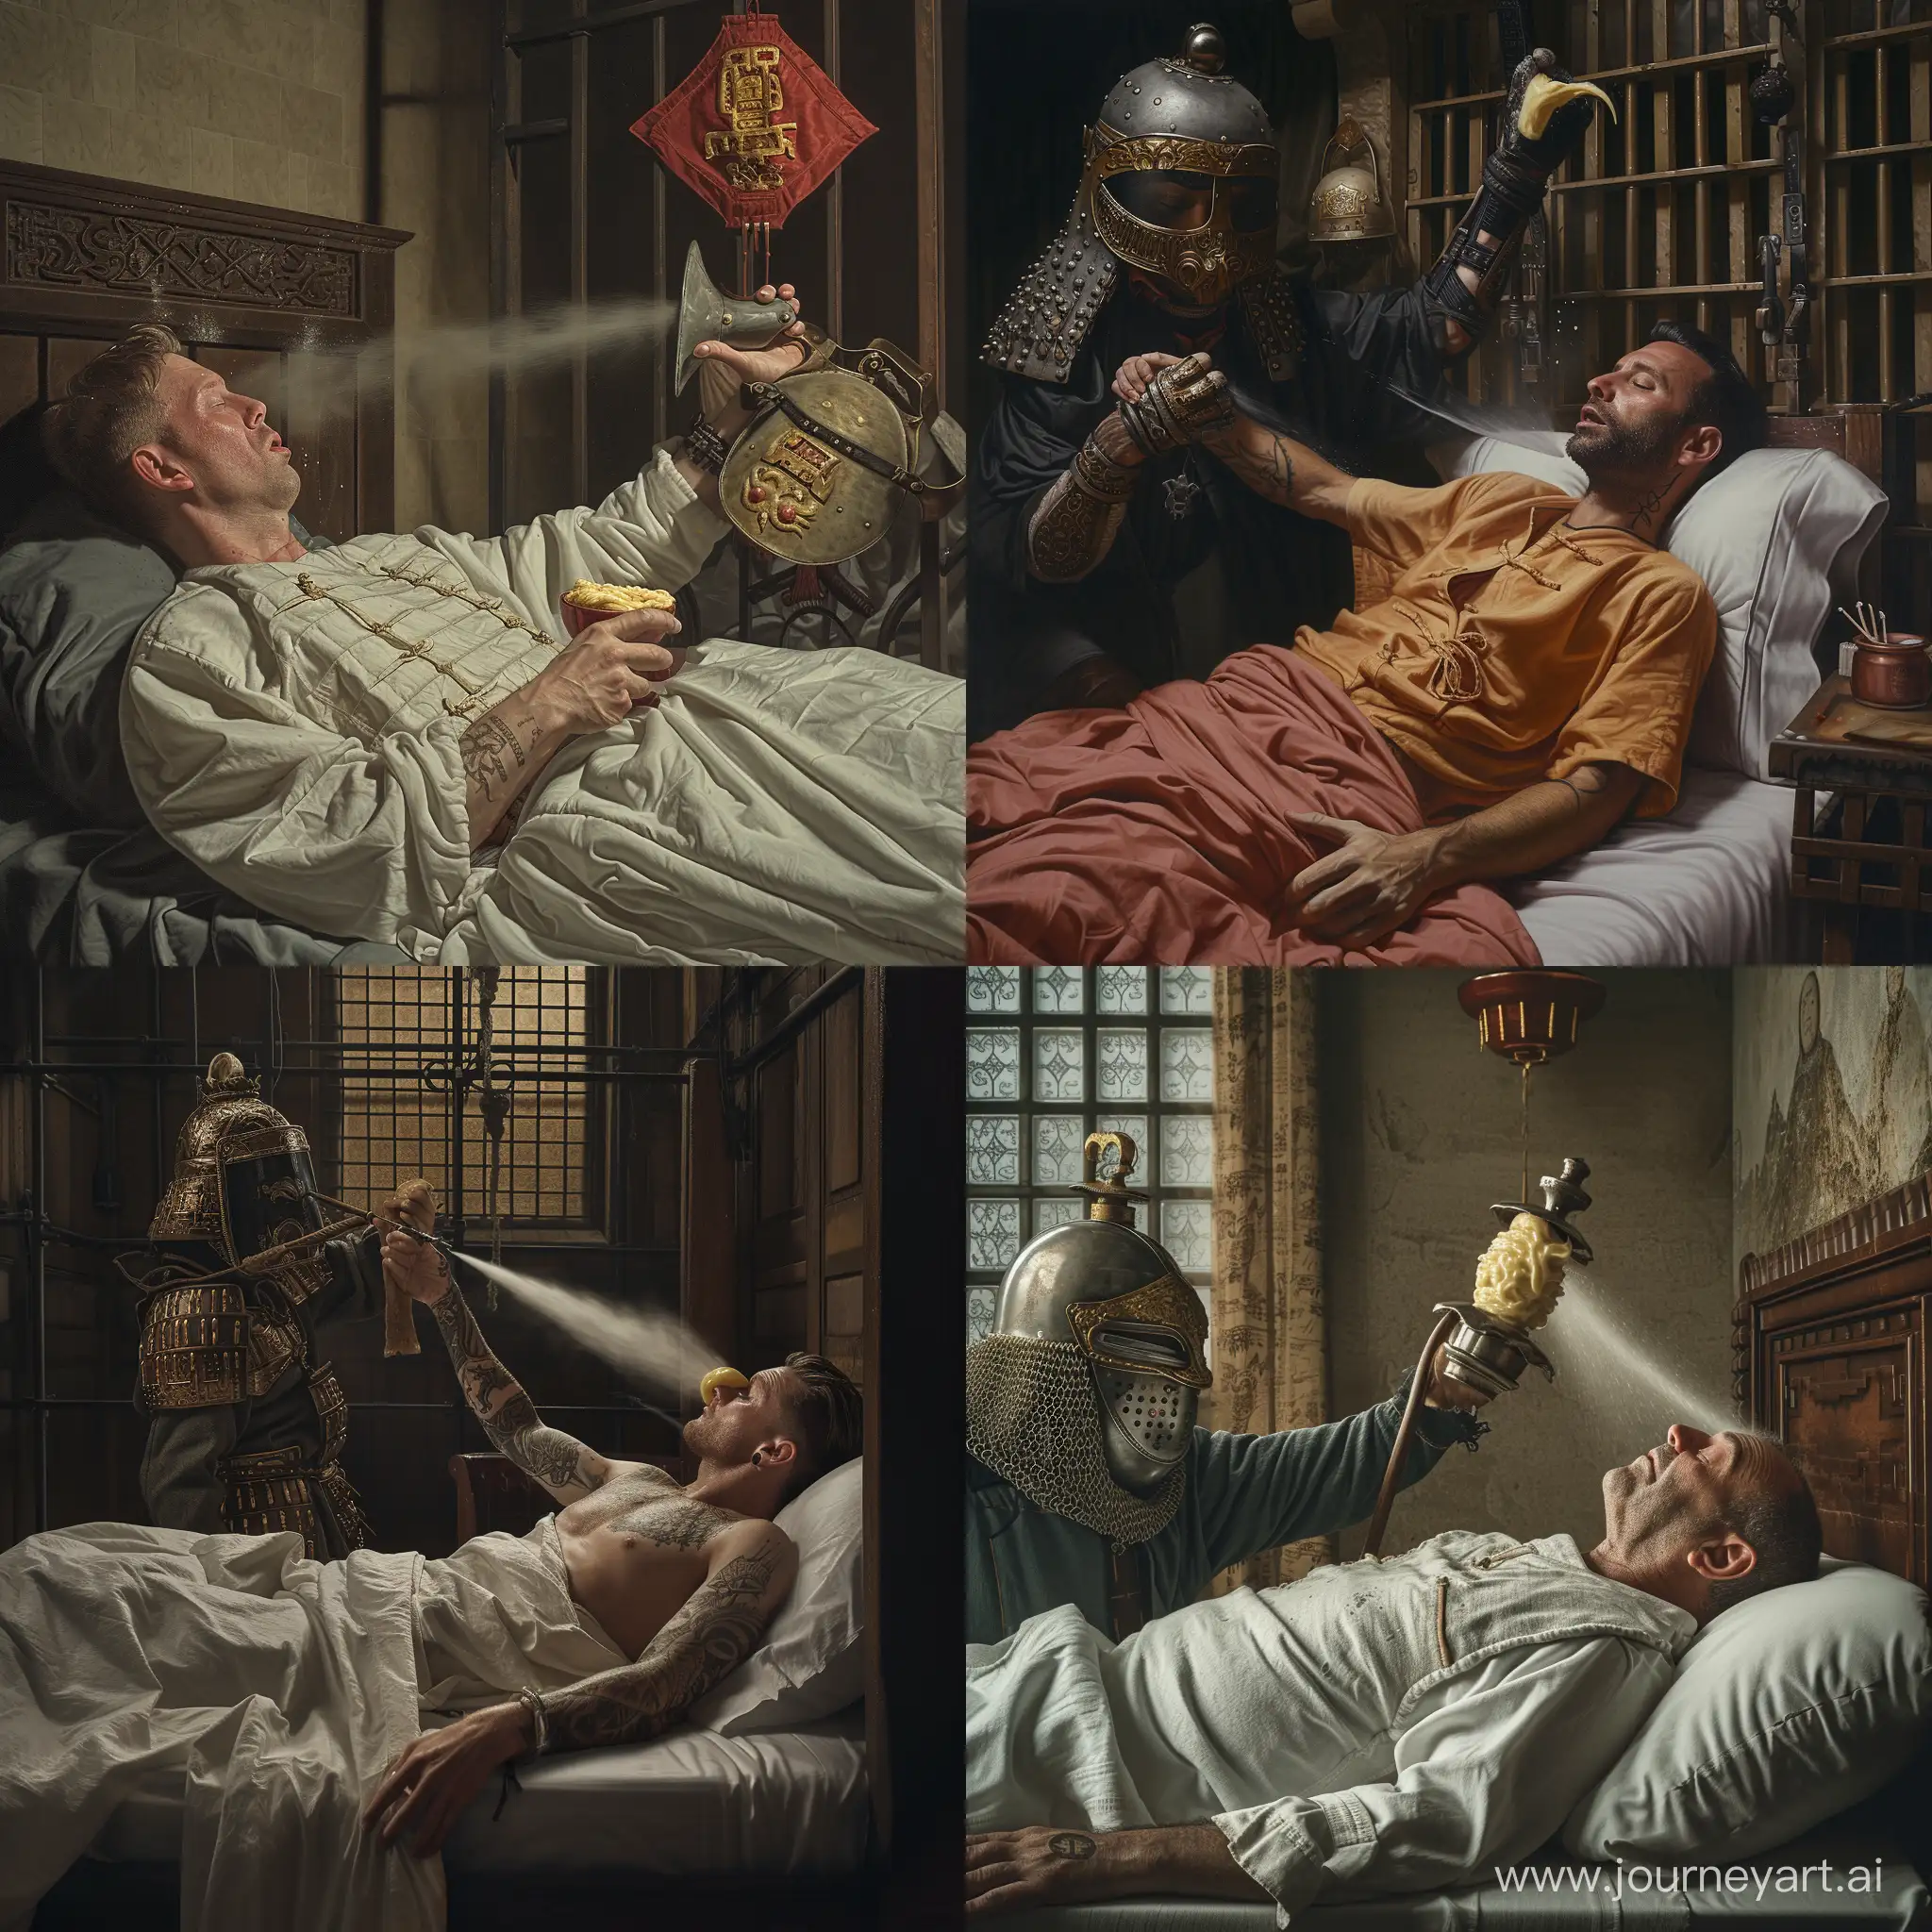 Sam-BankmanFried-in-Luxury-Prison-Cell-Receives-Mayo-Spray-from-Medieval-Chinese-Figure